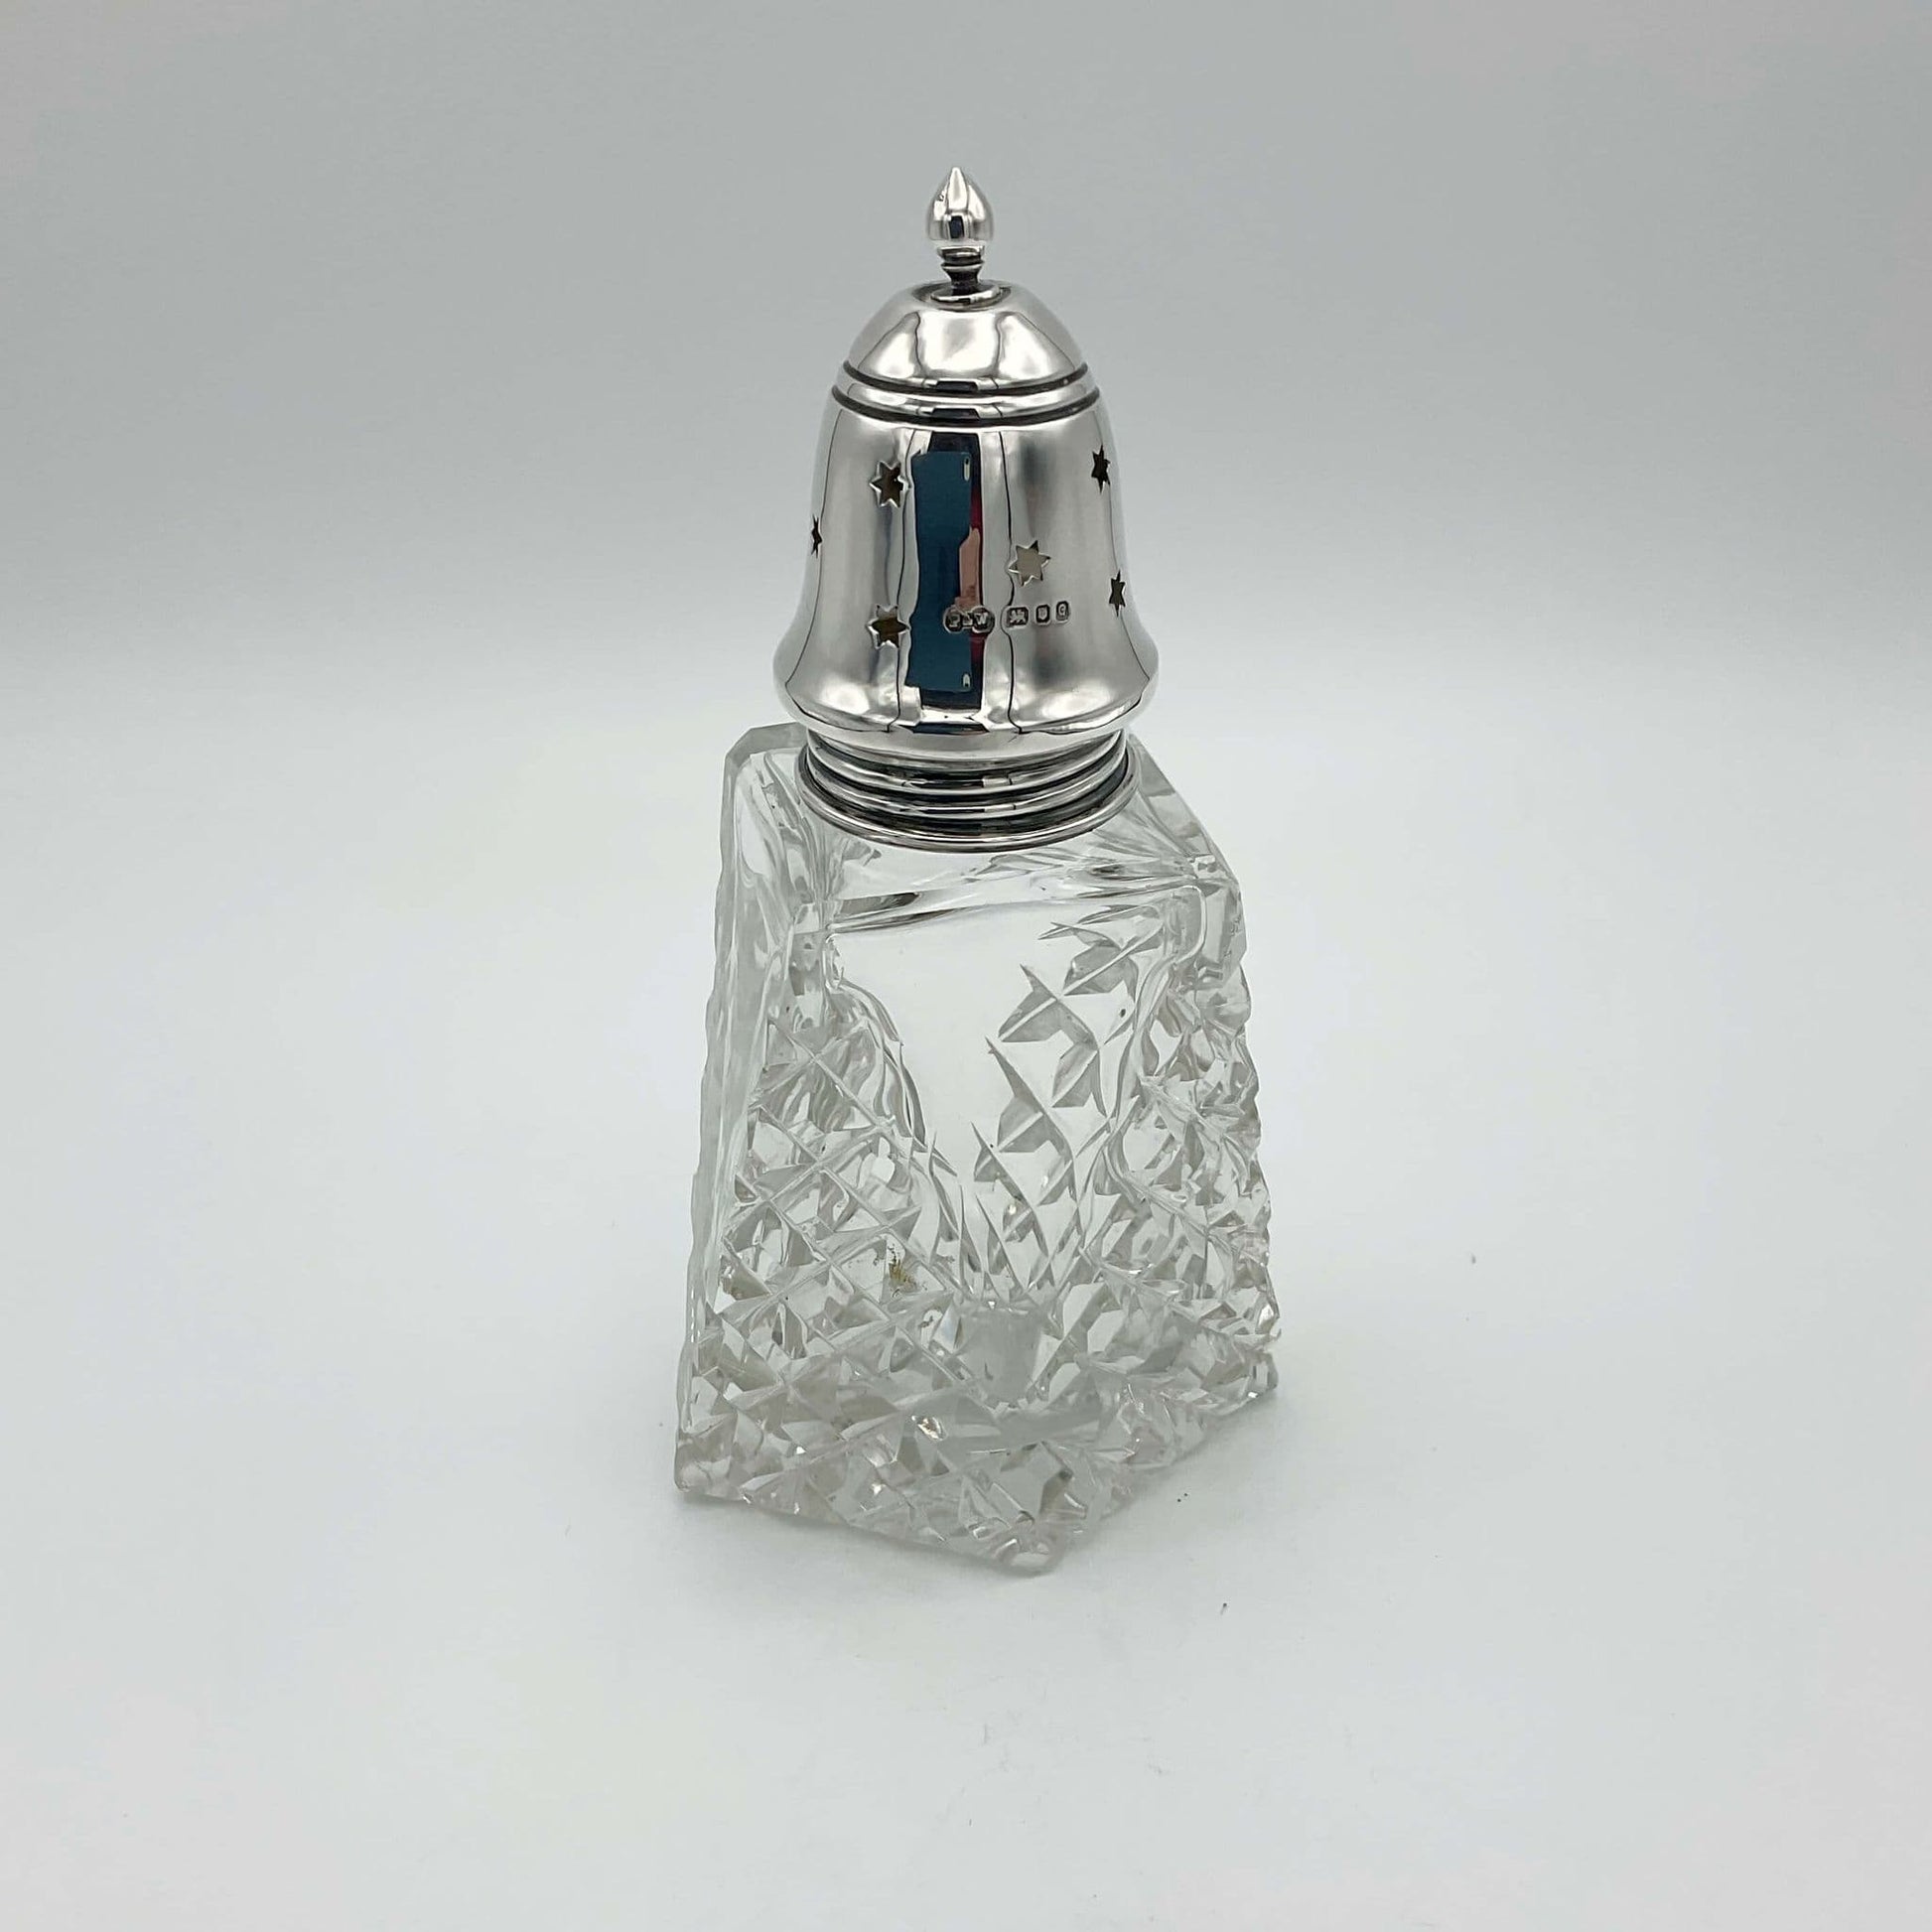 Silver topped sugar shaker with hallmarks and cut crystal glass base